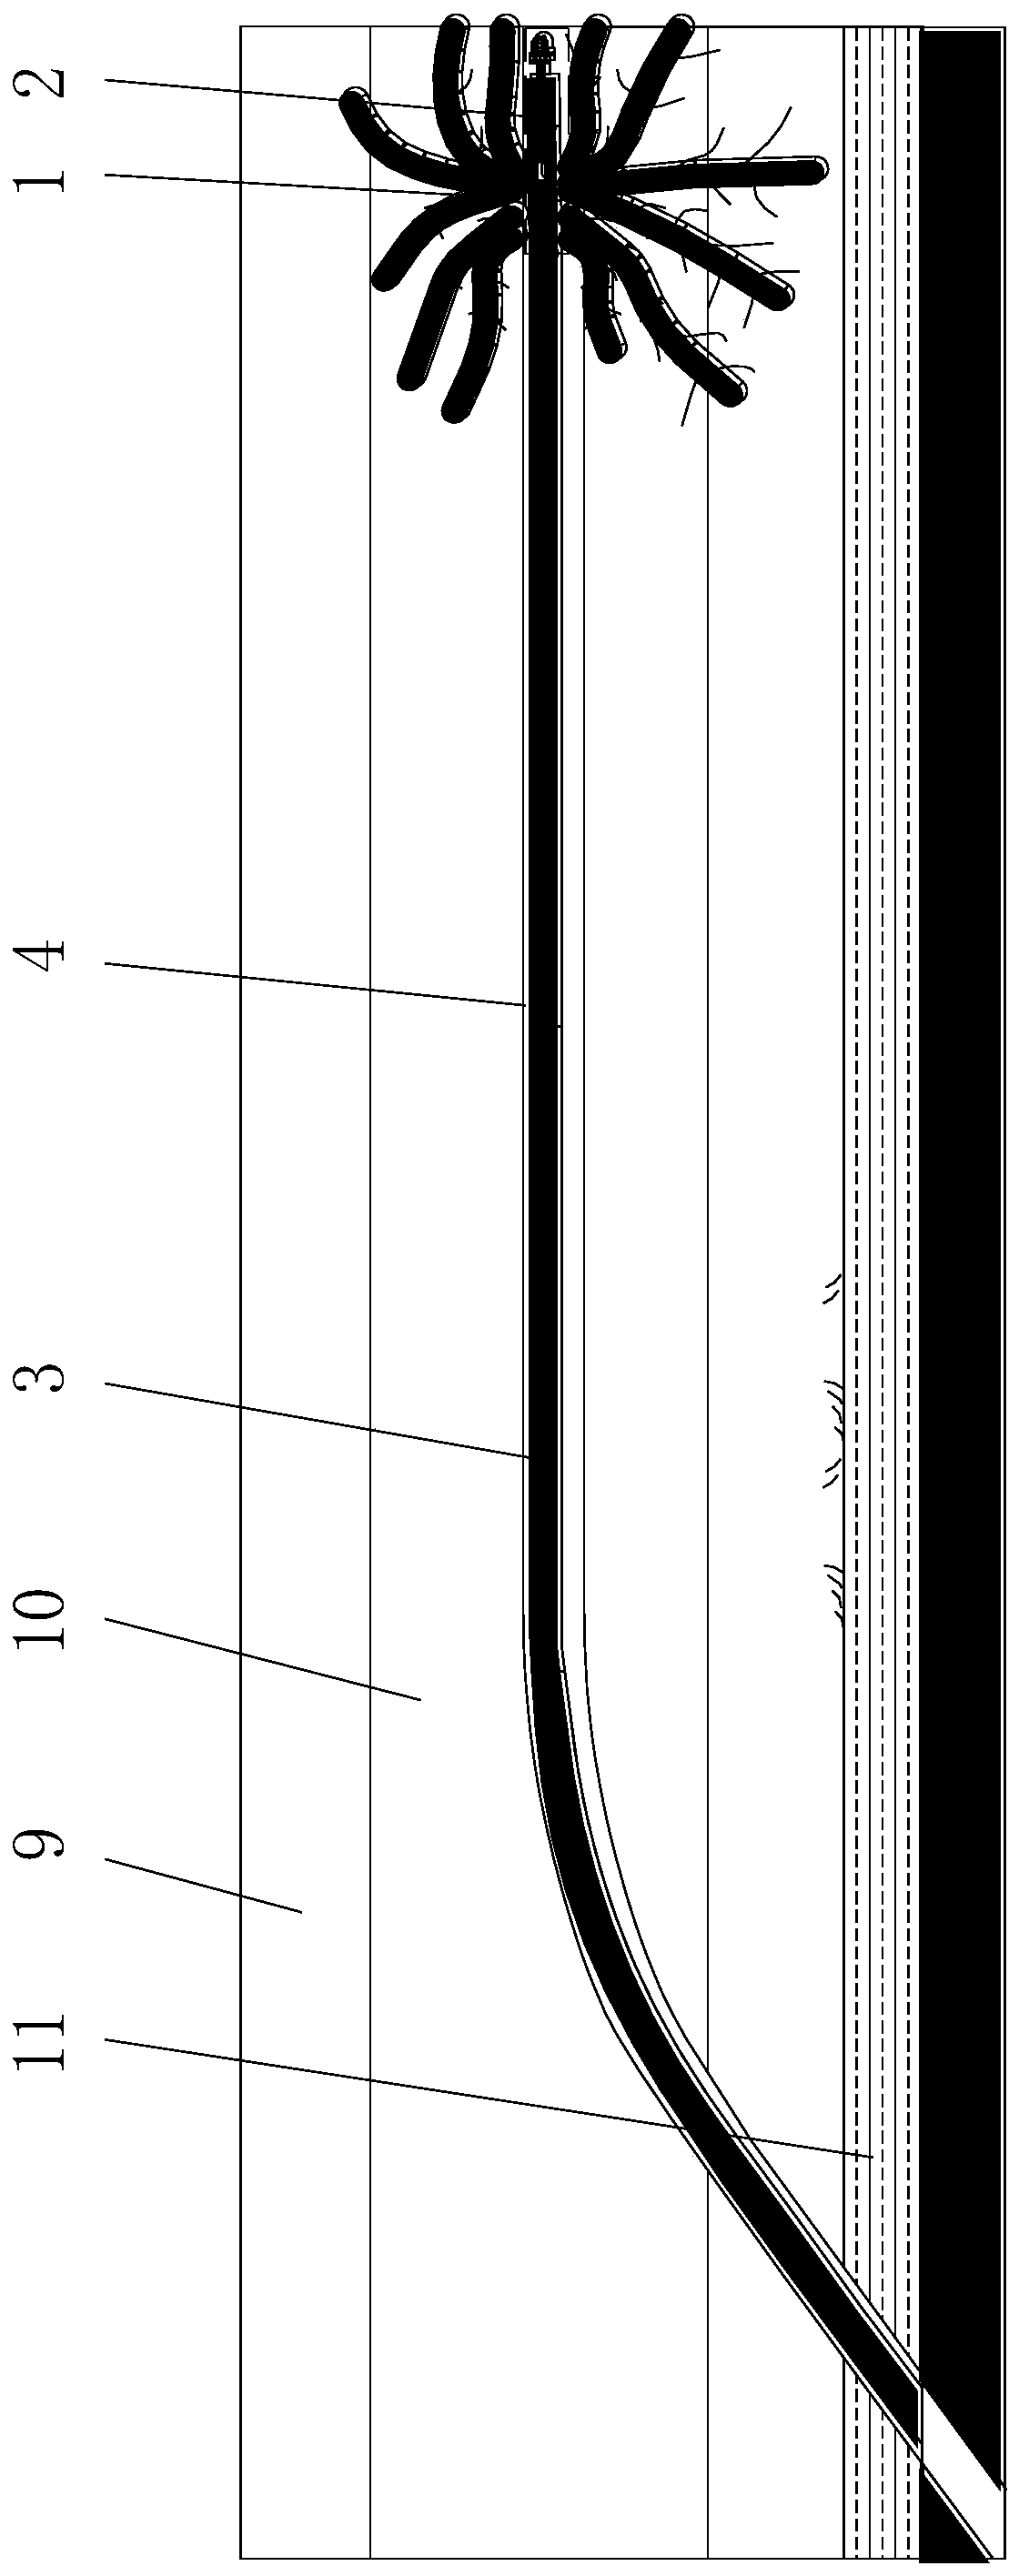 Hard roof comb shaped long borehole staged fracturing roadway deformation source treatment method